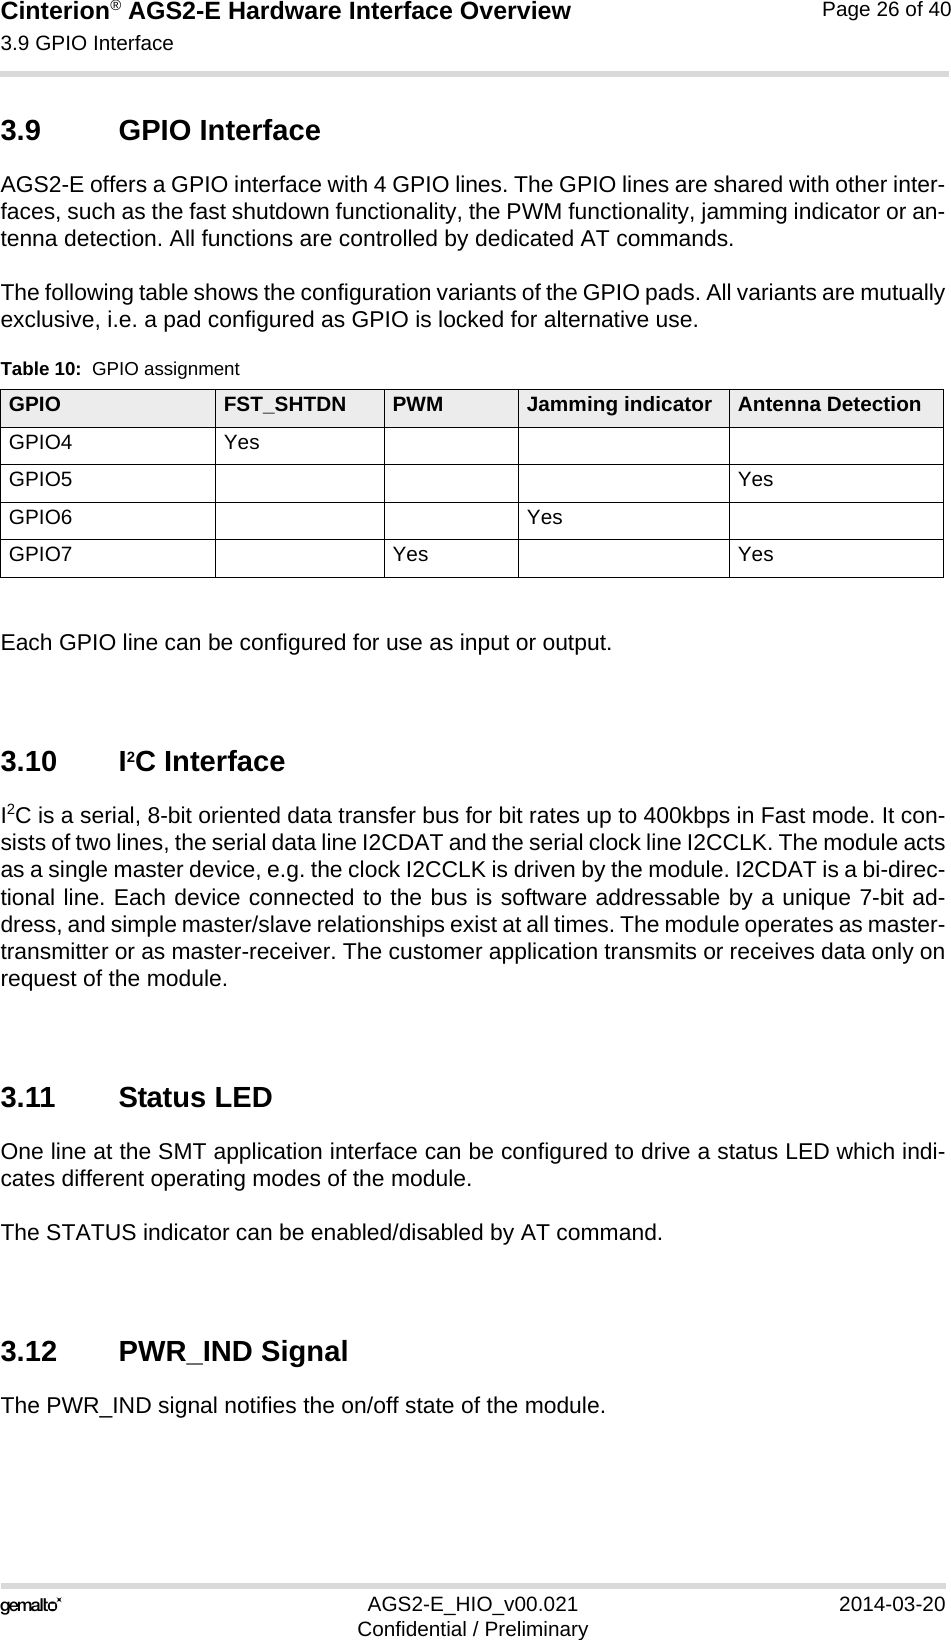 Cinterion® AGS2-E Hardware Interface Overview3.9 GPIO Interface27AGS2-E_HIO_v00.021 2014-03-20Confidential / PreliminaryPage 26 of 403.9 GPIO InterfaceAGS2-E offers a GPIO interface with 4 GPIO lines. The GPIO lines are shared with other inter-faces, such as the fast shutdown functionality, the PWM functionality, jamming indicator or an-tenna detection. All functions are controlled by dedicated AT commands. The following table shows the configuration variants of the GPIO pads. All variants are mutuallyexclusive, i.e. a pad configured as GPIO is locked for alternative use.Each GPIO line can be configured for use as input or output. 3.10 I2C InterfaceI2C is a serial, 8-bit oriented data transfer bus for bit rates up to 400kbps in Fast mode. It con-sists of two lines, the serial data line I2CDAT and the serial clock line I2CCLK. The module actsas a single master device, e.g. the clock I2CCLK is driven by the module. I2CDAT is a bi-direc-tional line. Each device connected to the bus is software addressable by a unique 7-bit ad-dress, and simple master/slave relationships exist at all times. The module operates as master-transmitter or as master-receiver. The customer application transmits or receives data only onrequest of the module.3.11 Status LEDOne line at the SMT application interface can be configured to drive a status LED which indi-cates different operating modes of the module. The STATUS indicator can be enabled/disabled by AT command. 3.12 PWR_IND SignalThe PWR_IND signal notifies the on/off state of the module.Table 10:  GPIO assignmentGPIO FST_SHTDN PWM Jamming indicator Antenna DetectionGPIO4 YesGPIO5 YesGPIO6 YesGPIO7 Yes Yes